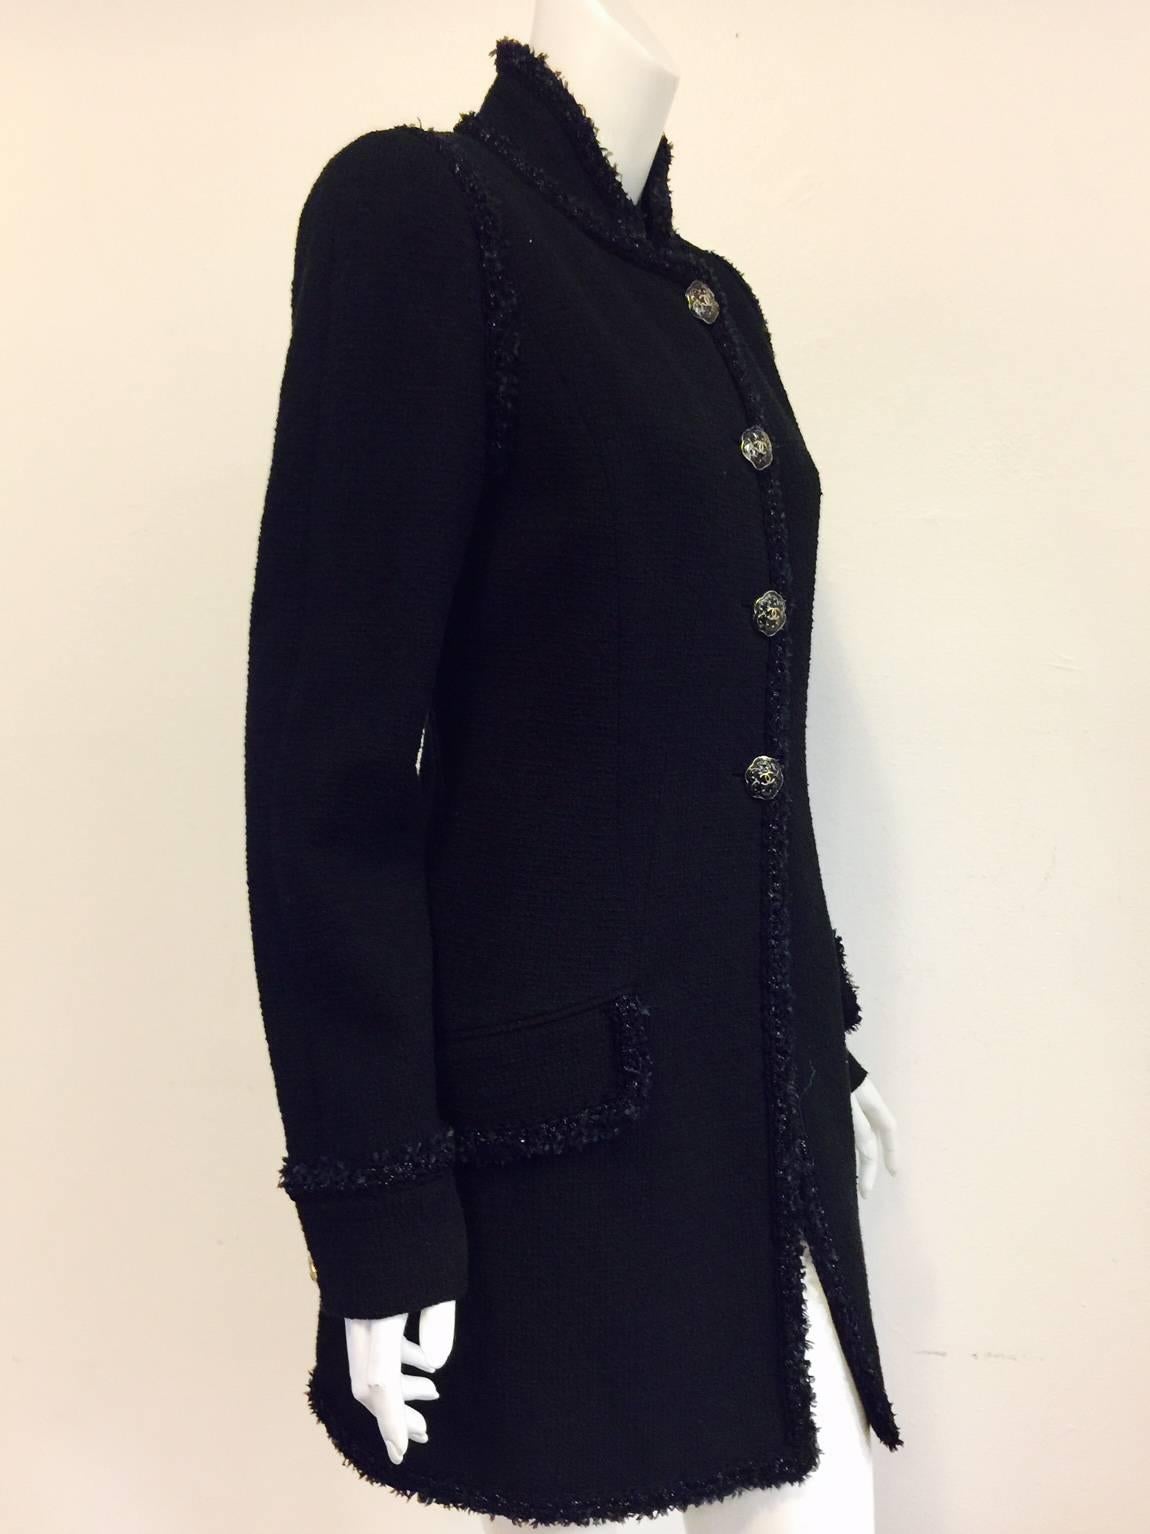 Chanel Black Tweed Coat is a must for any "Coco Connoisseur"!  Influenced by coats worn by officers of years past, coat features ultra luxurious 100% Cotton fabric, elongated silhouette and standup collar.  Two front flap pockets.  Rear